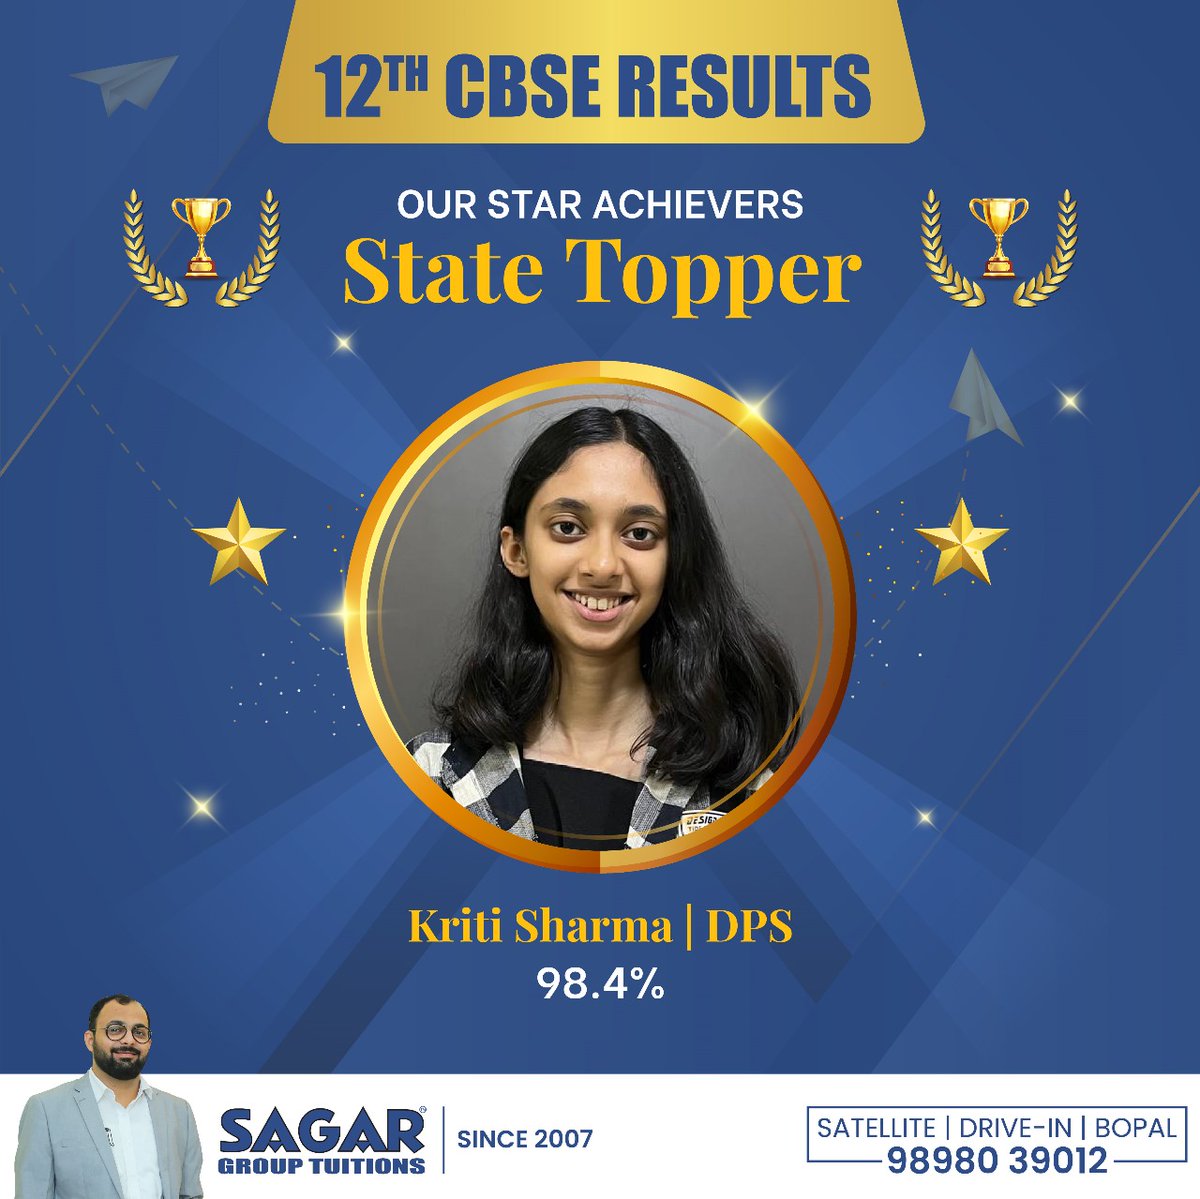 Sagar Group Tuitions is thrilled to celebrate the remarkable achievement of our star student Kriti Sharma, who has topped the state in the 12th CBSE results with an impressive 98.4%! 

#SagarGroupTuitions #commercetuition #cbseboardresults #schooltoppers #statetoppers